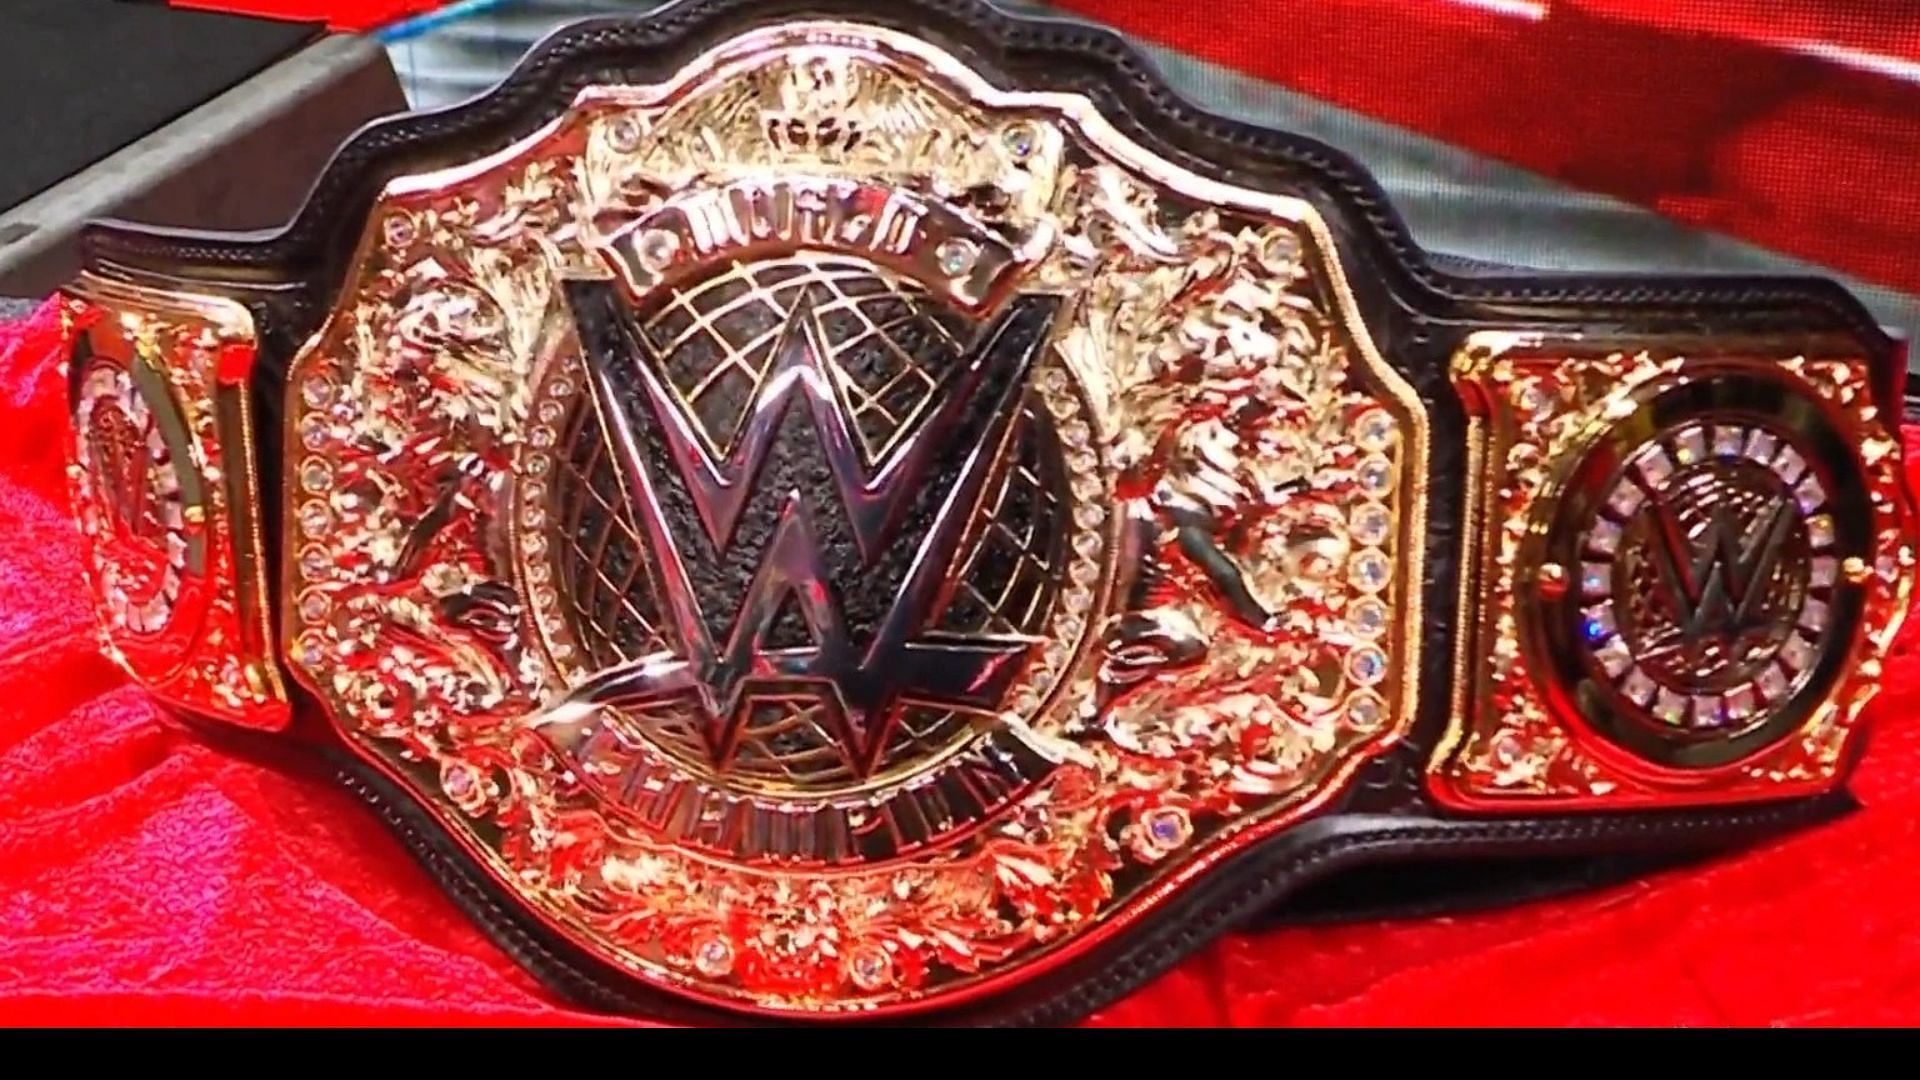 The WWE World Heavyweight Champion is one of the top prizes in WWE